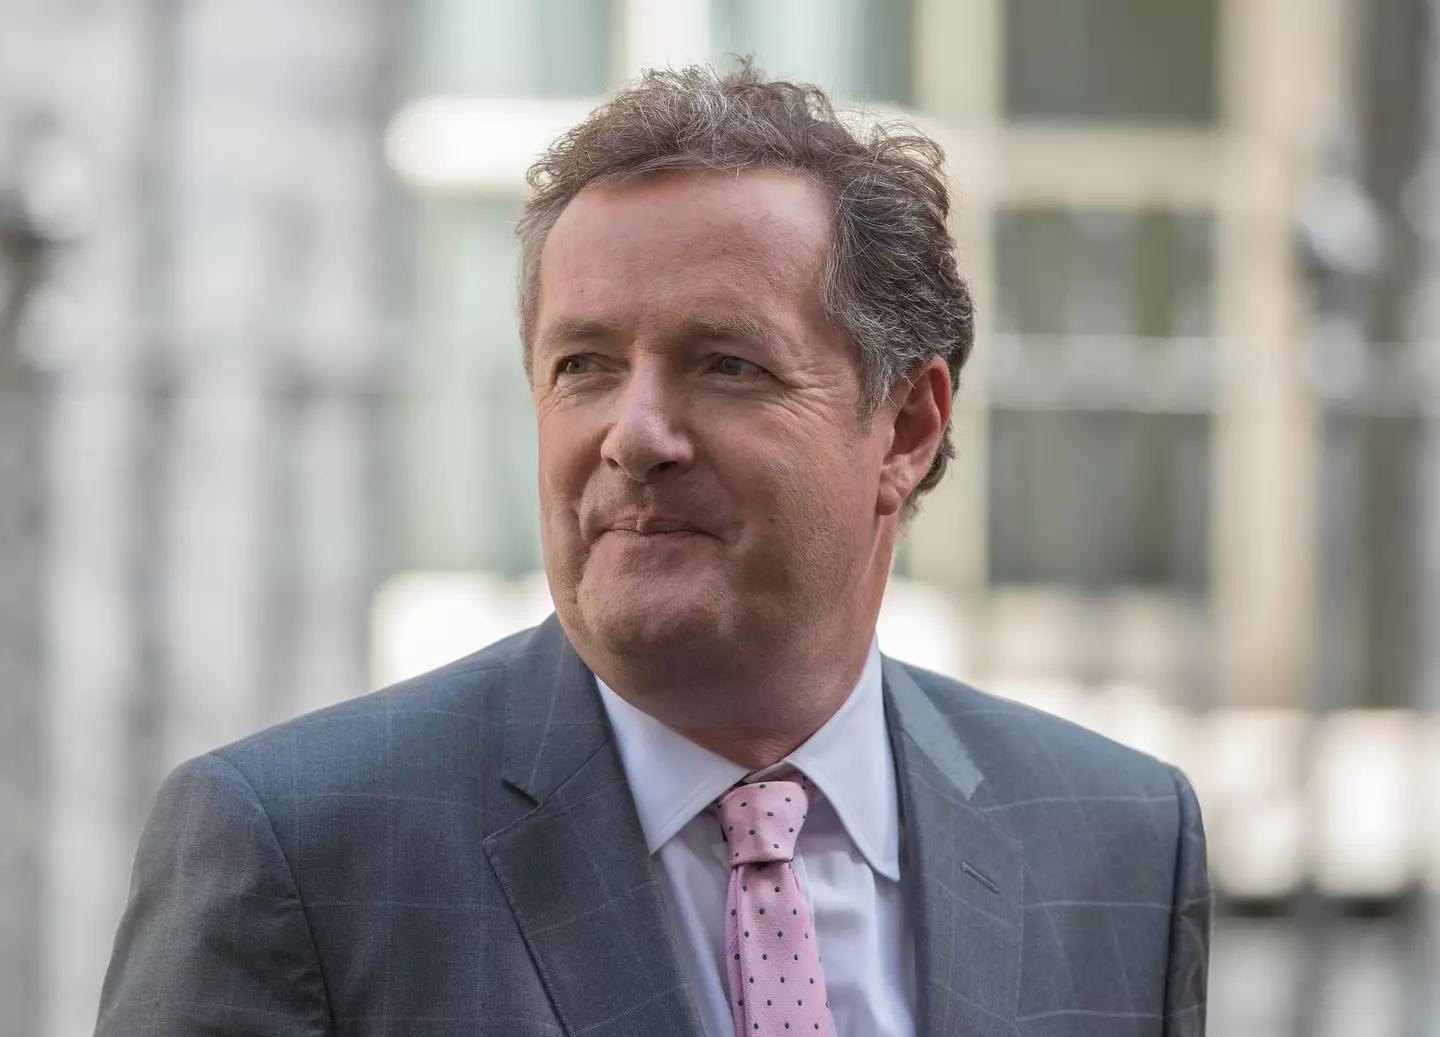 Piers Morgan was labelled as "bitter" for his tweets about An Audience With Adele (